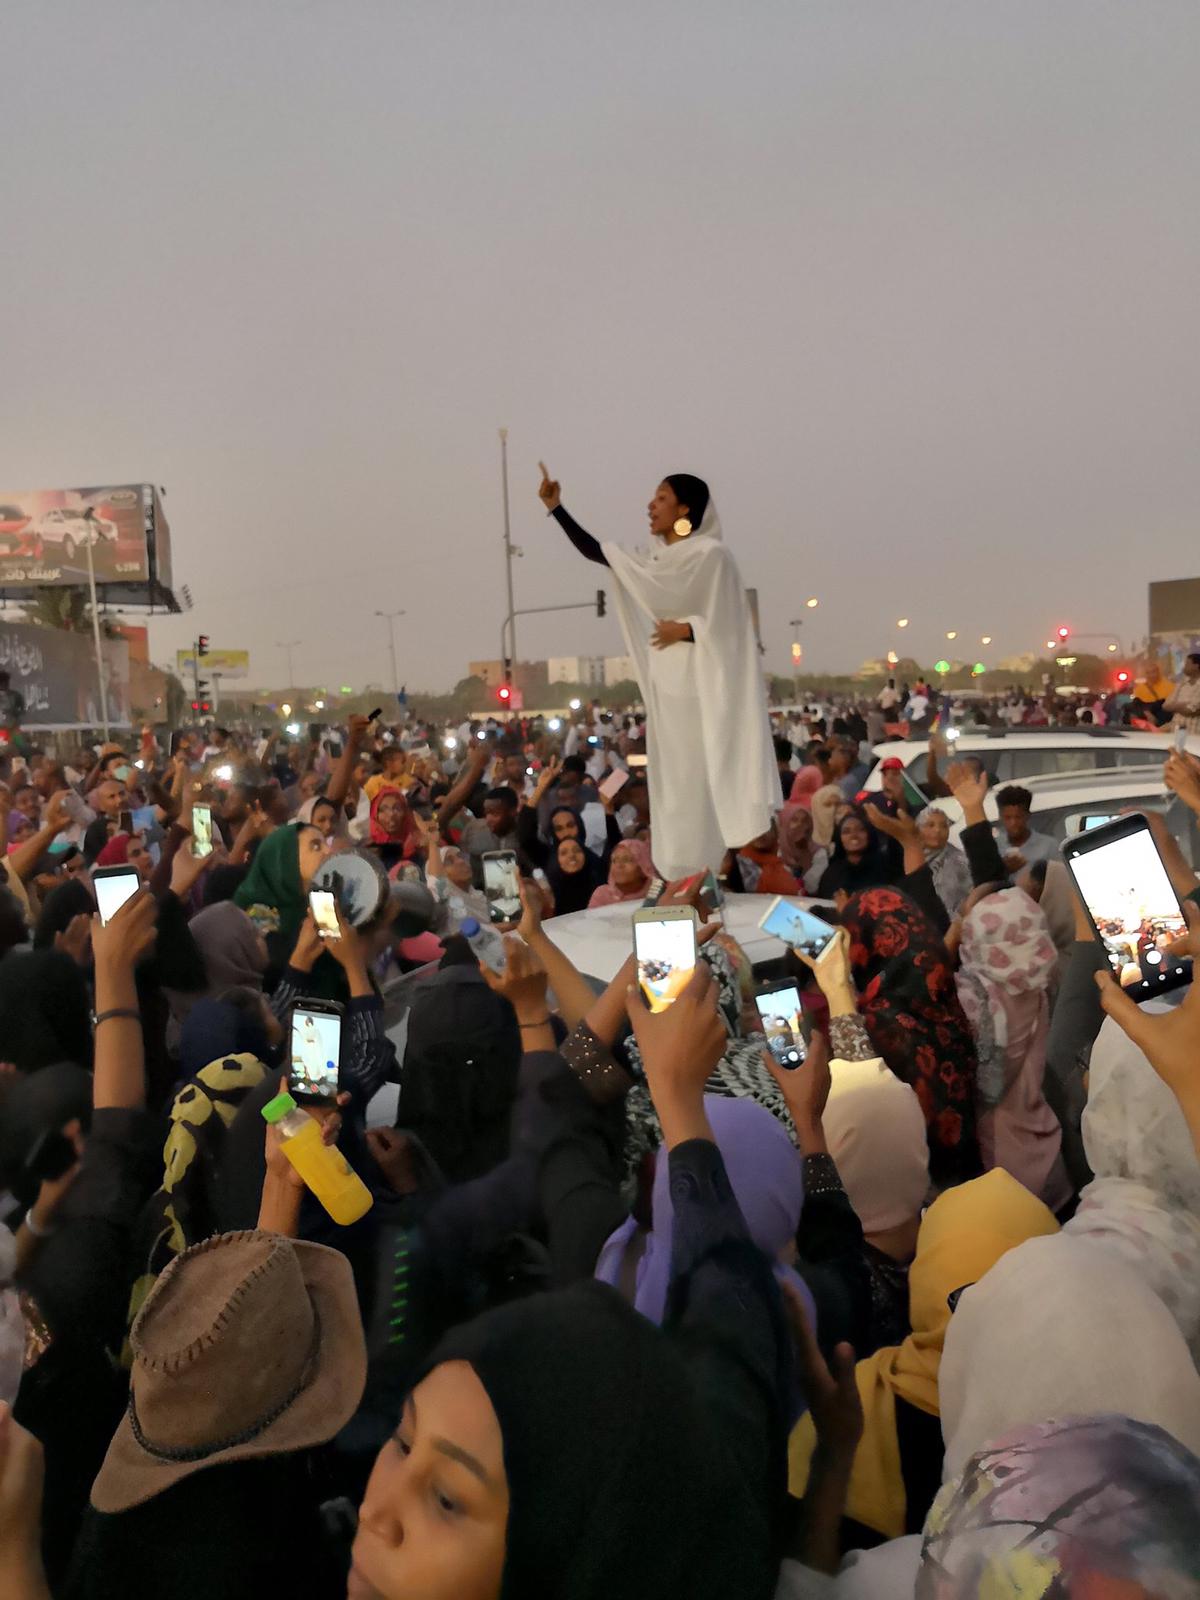 Struggle continues in Sudan: Now time to pressurize military for civilian govt